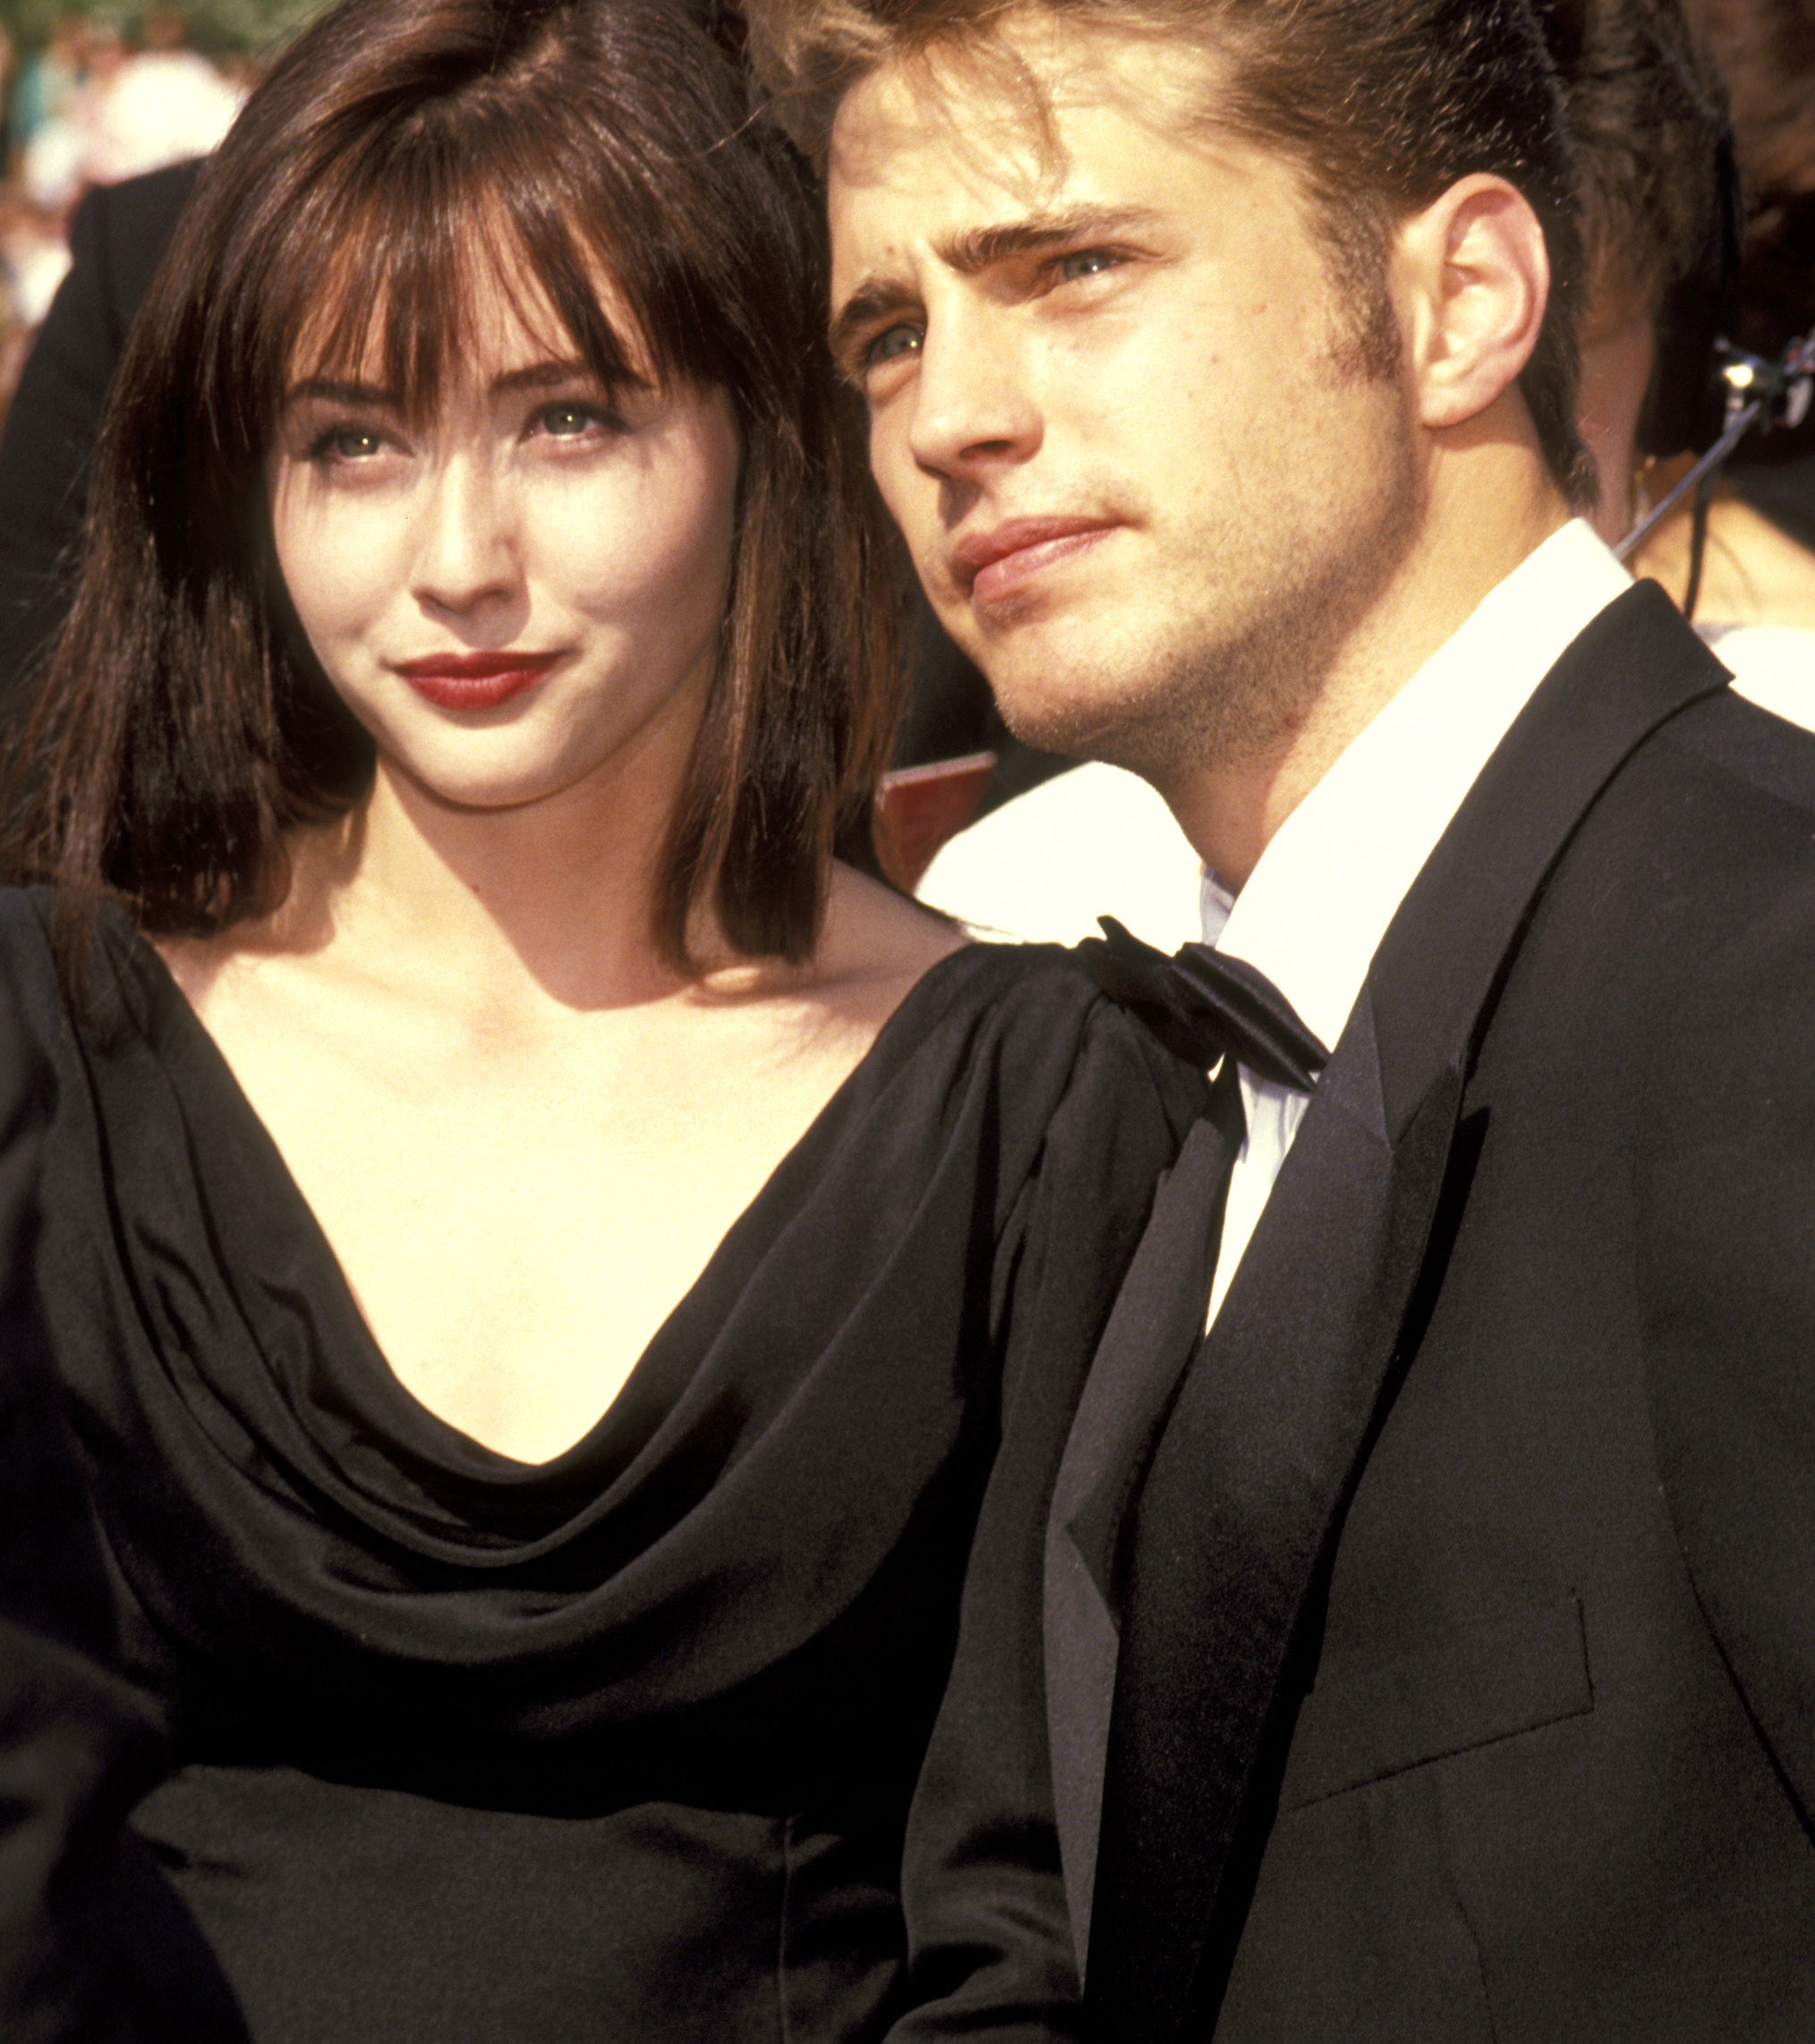 Shannen Doherty and Jason Priestley smiling on the red carpet